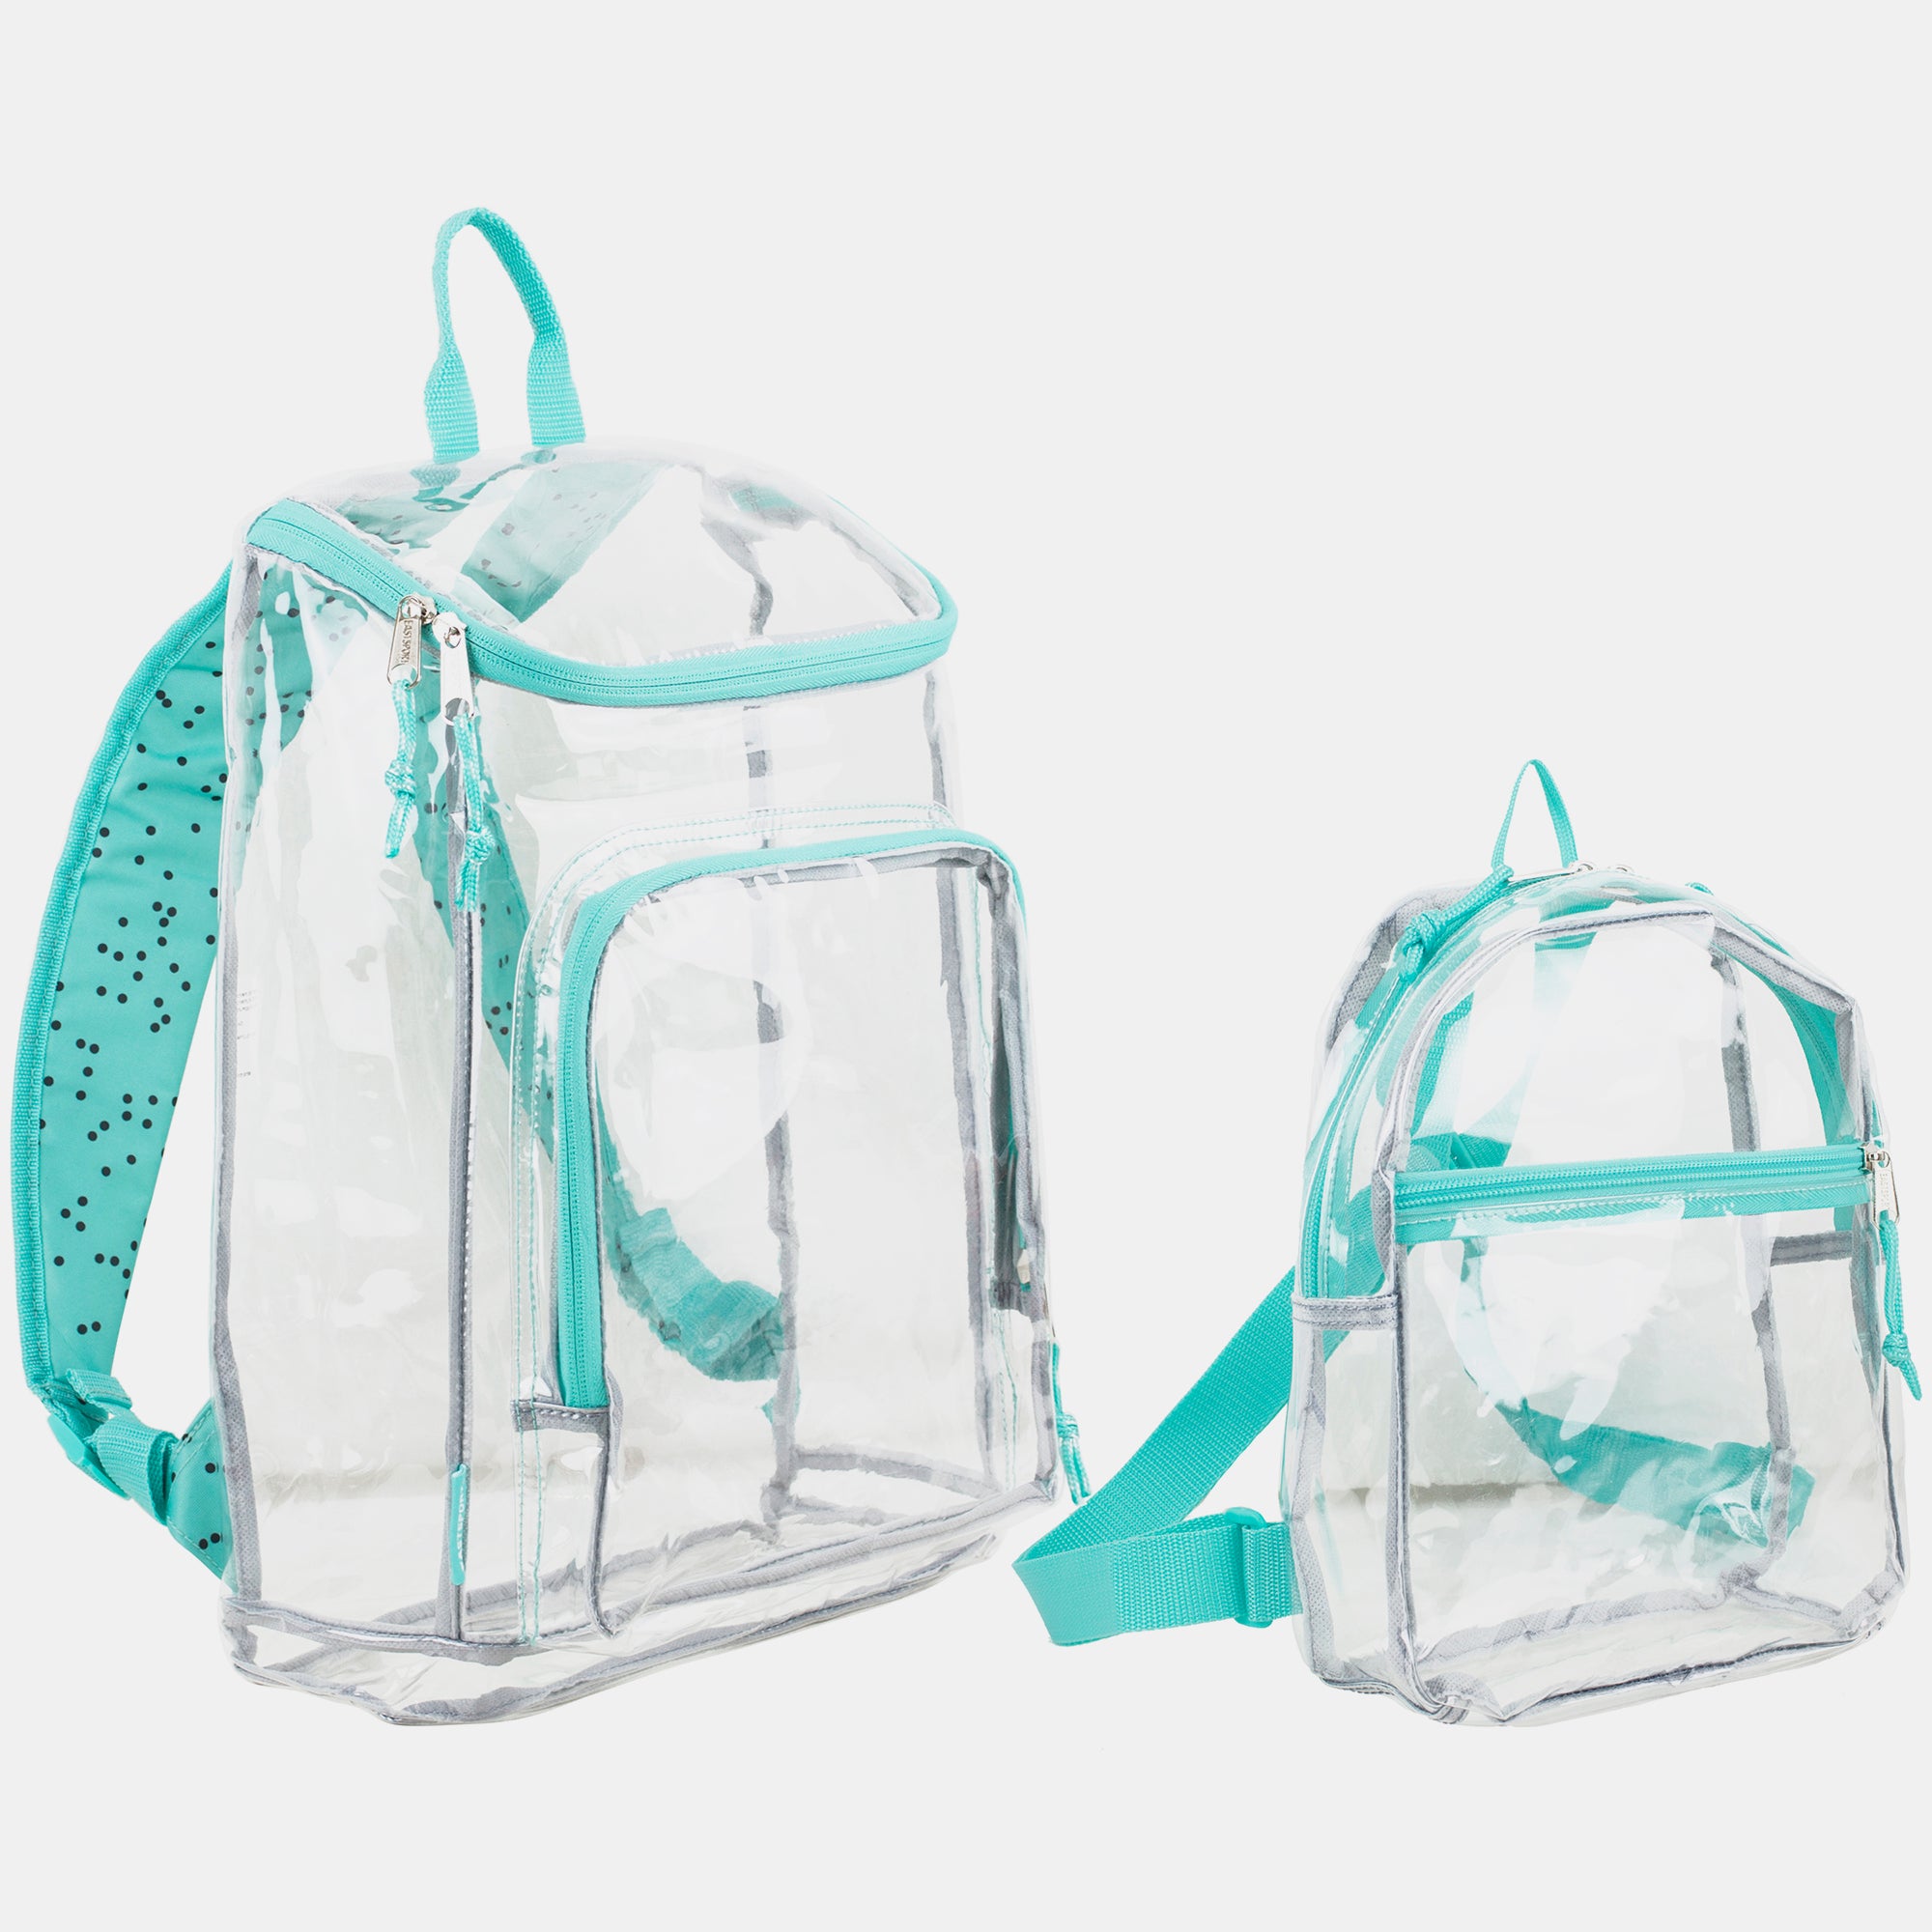 Eastsport Clear Top Loader Backpack with Mini Backpack Combo